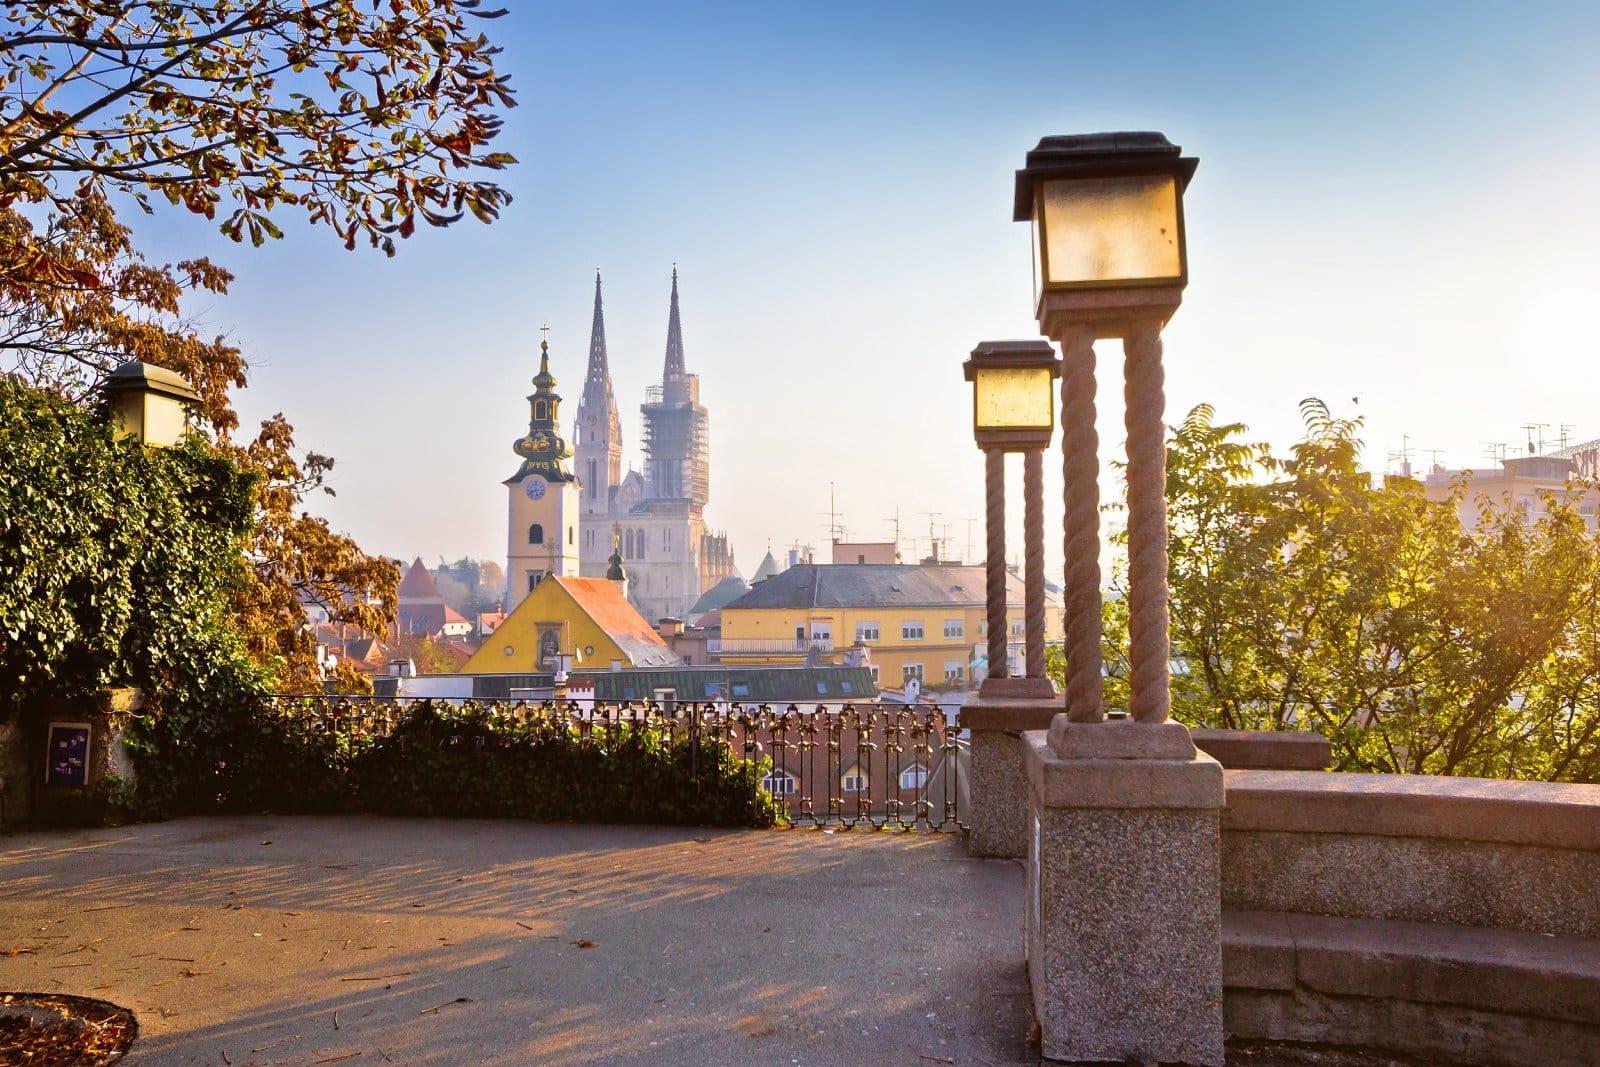 <p>Next stop, Zagreb! This enchanting city offers picturesque architecture and a thriving expat community, all at an affordable price of $400 to $600 per month for a one-bedroom apartment.</p>